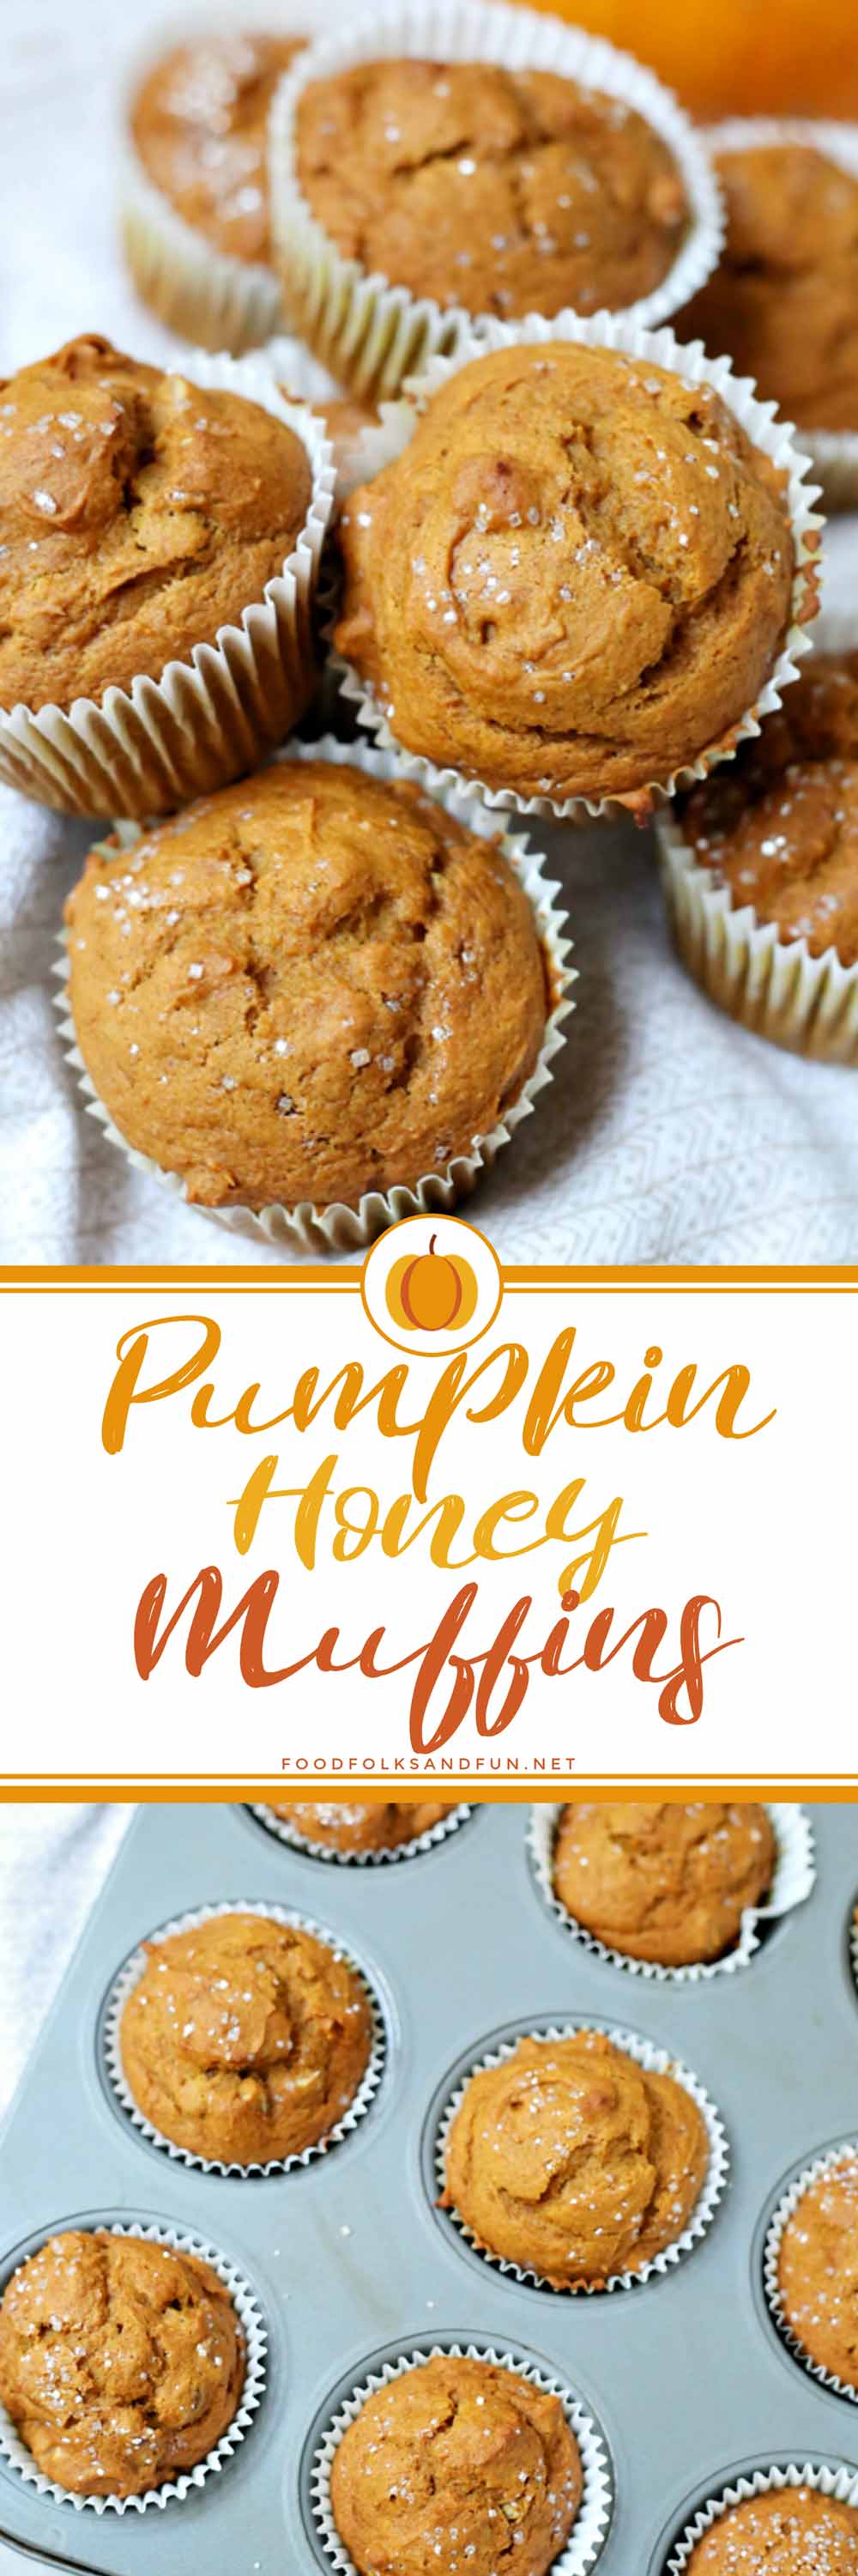 These Pumpkin Honey Muffins are easy to make and are made with honey instead of sugar! They're also an easy breakfast option for weekdays or holidays! via @foodfolksandfun